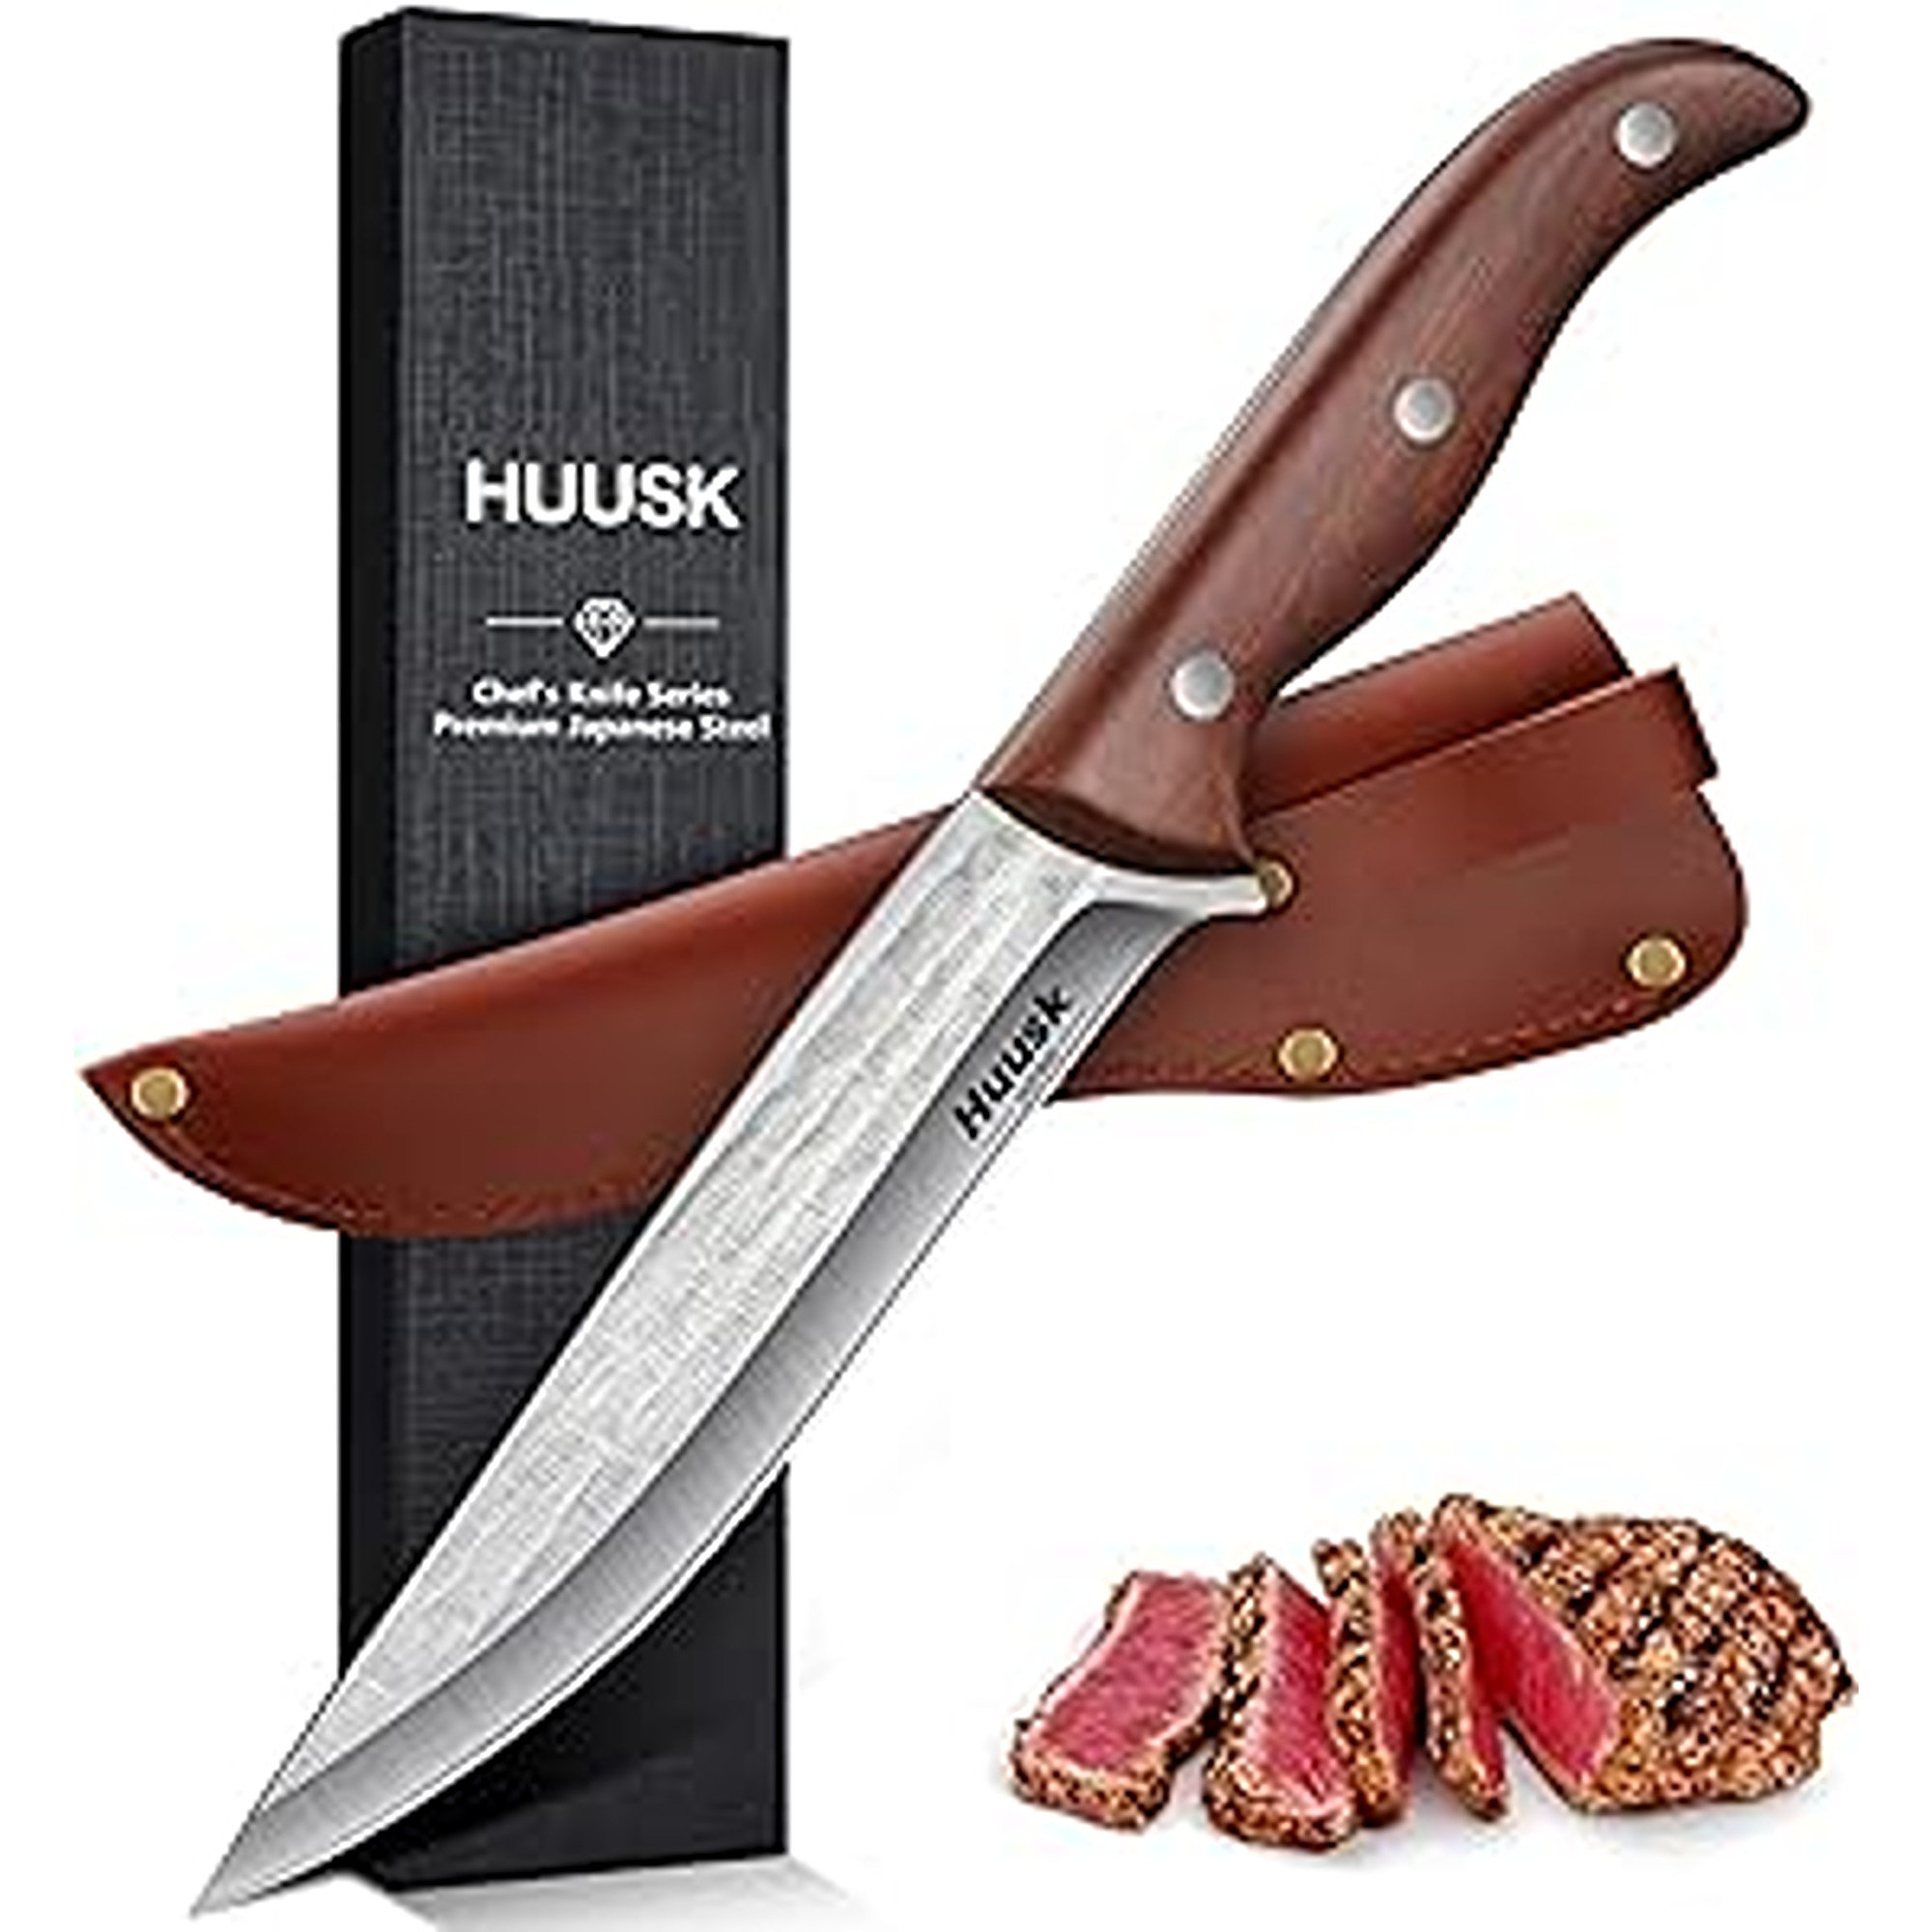  Huusk Japan Knifves, Chef Knife and Butcher knife, Professional  Hand Forged High Carbon Steel Sharp Kitchen Knife- Wood Handle with Black  Gift Box: Home & Kitchen